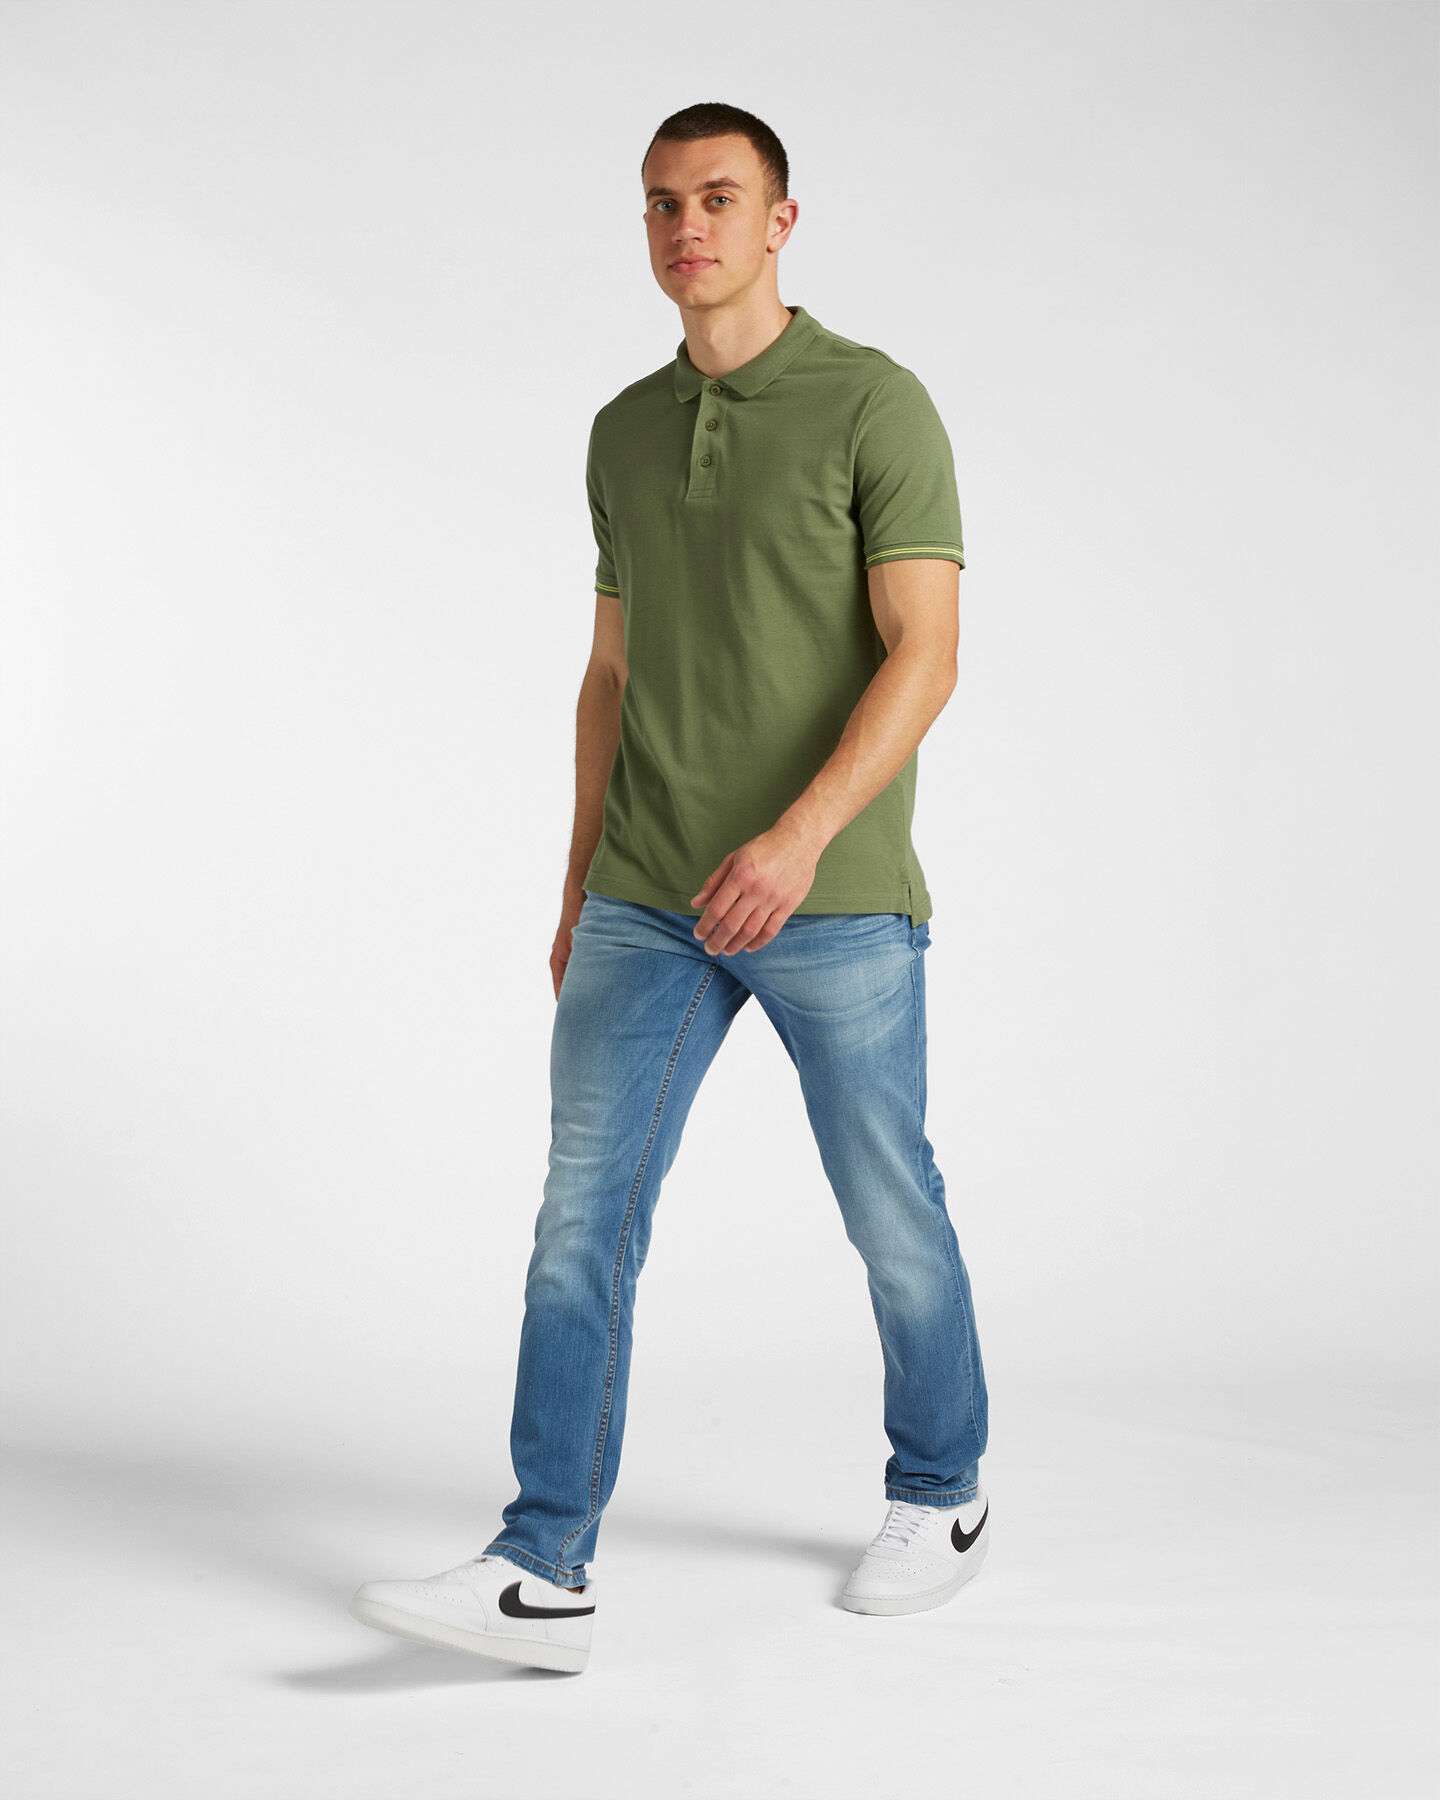  Polo DACK'S BASIC COLLECTION M S4118370|838|L scatto 3